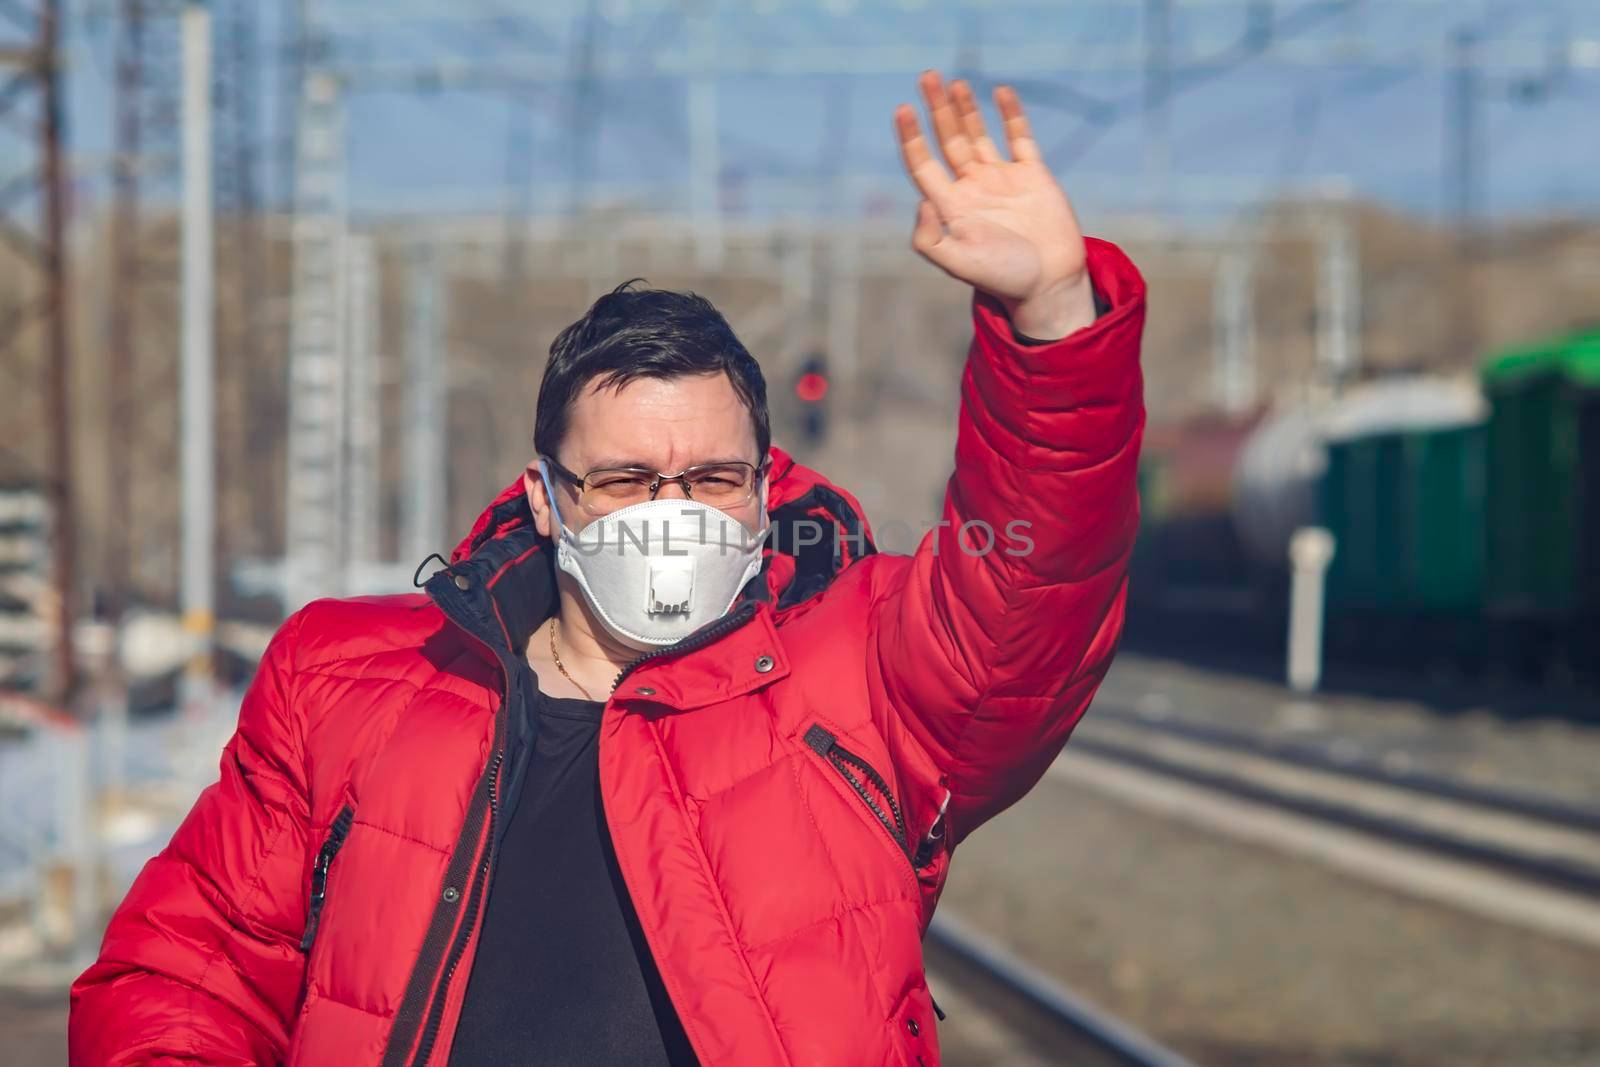 a man in a medical anti virus mask waves as he sees off or meets a person on the platform of a railway station